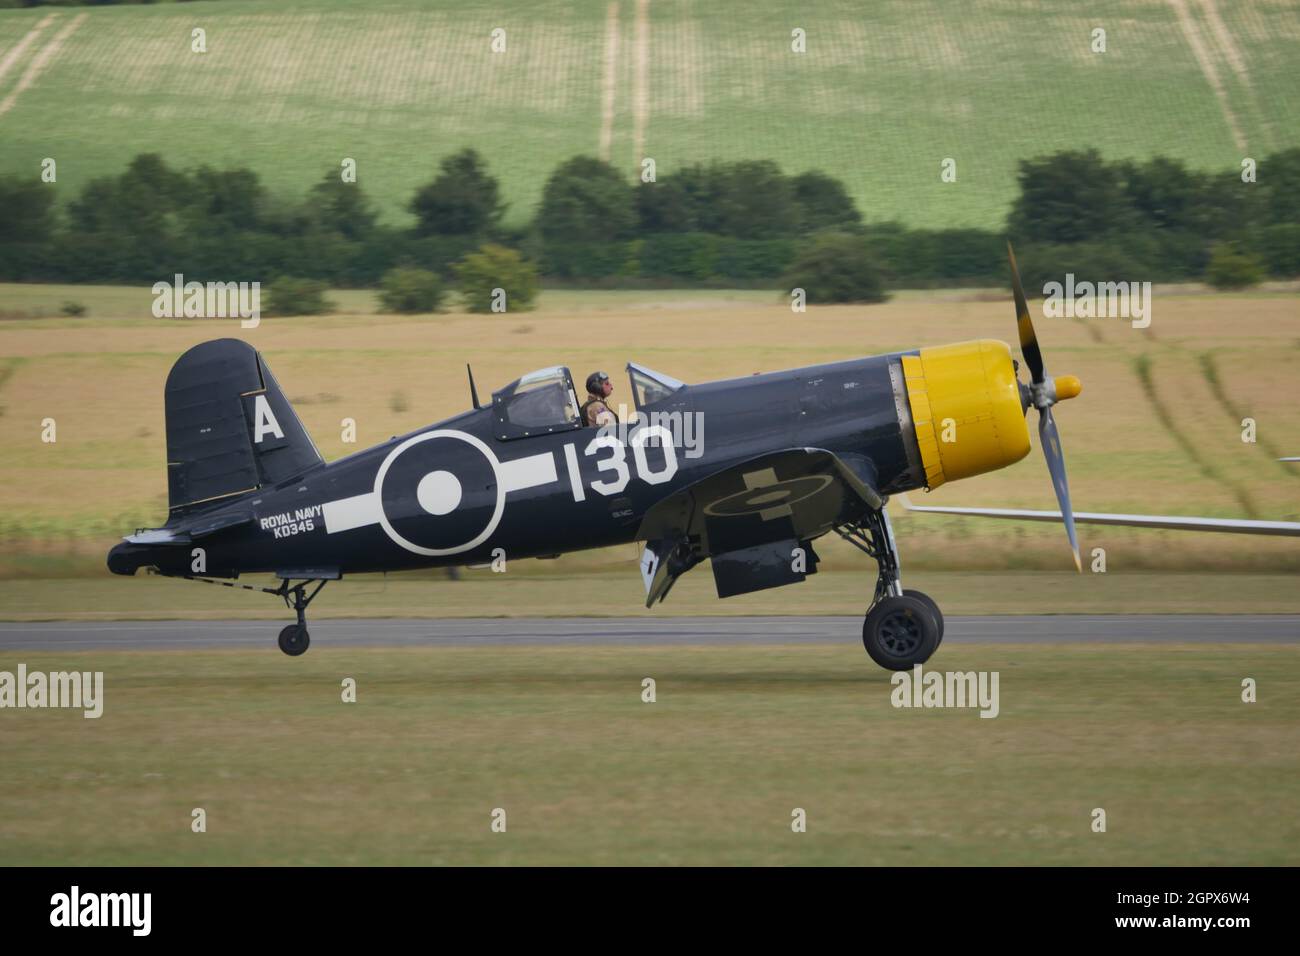 Duxford England Flying Legends Air Show JULY, 11, 2015 Chance Vought F4U Corsair. The F4U Corsair is a United States carrier based fighter aircraft used in World War II and the Korean War.  Stock Photo